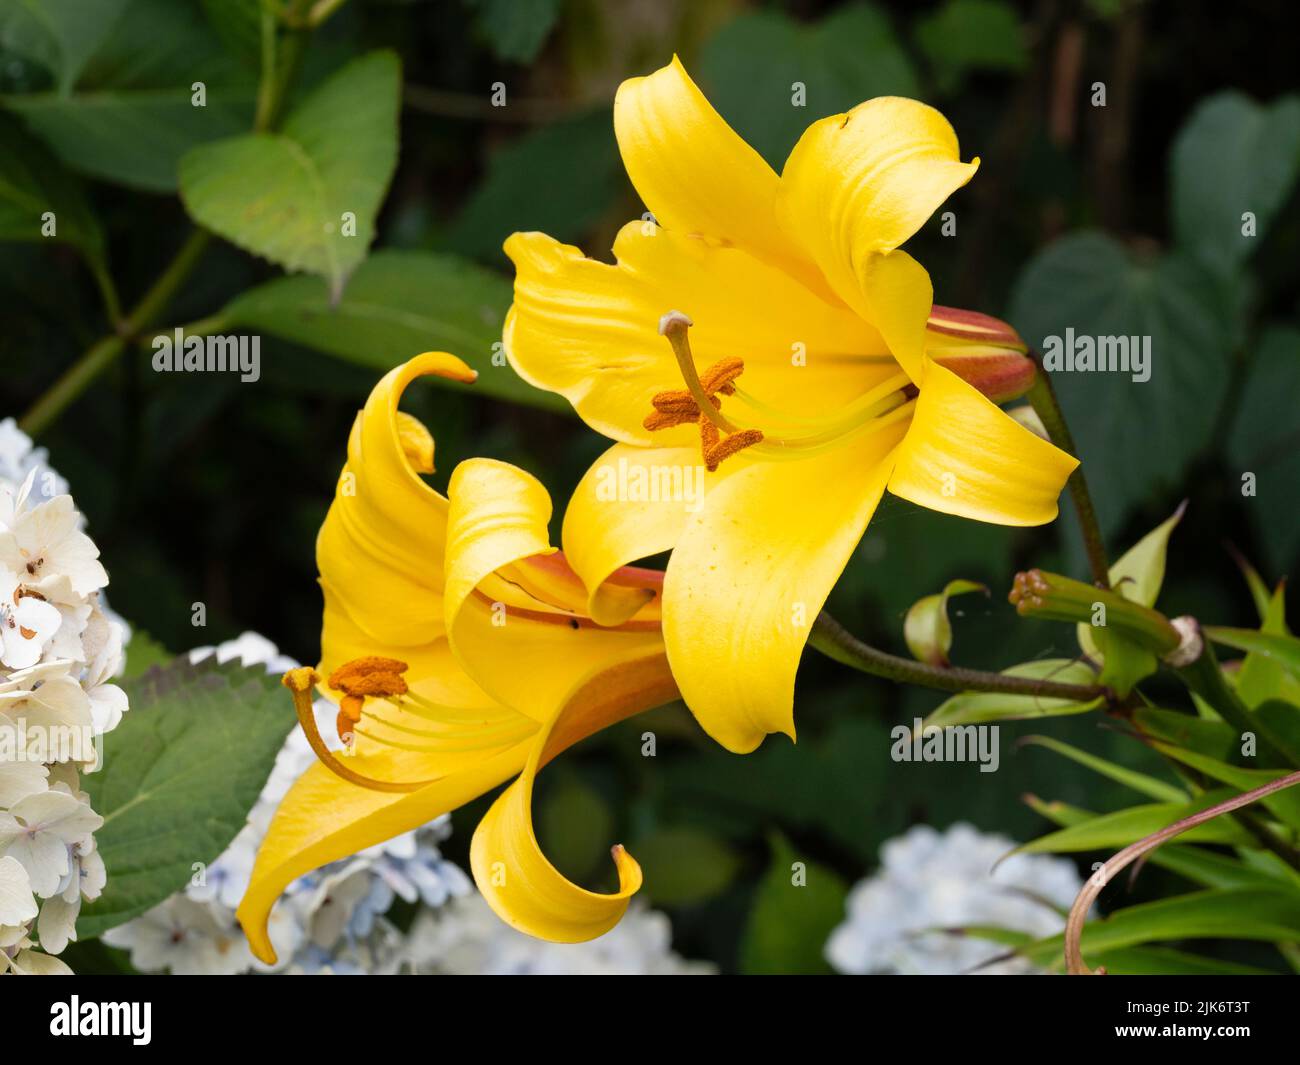 Close up of the fragrant golden trumpet flowers of the hardy lily, Lilium 'Golden Splendour' Stock Photo